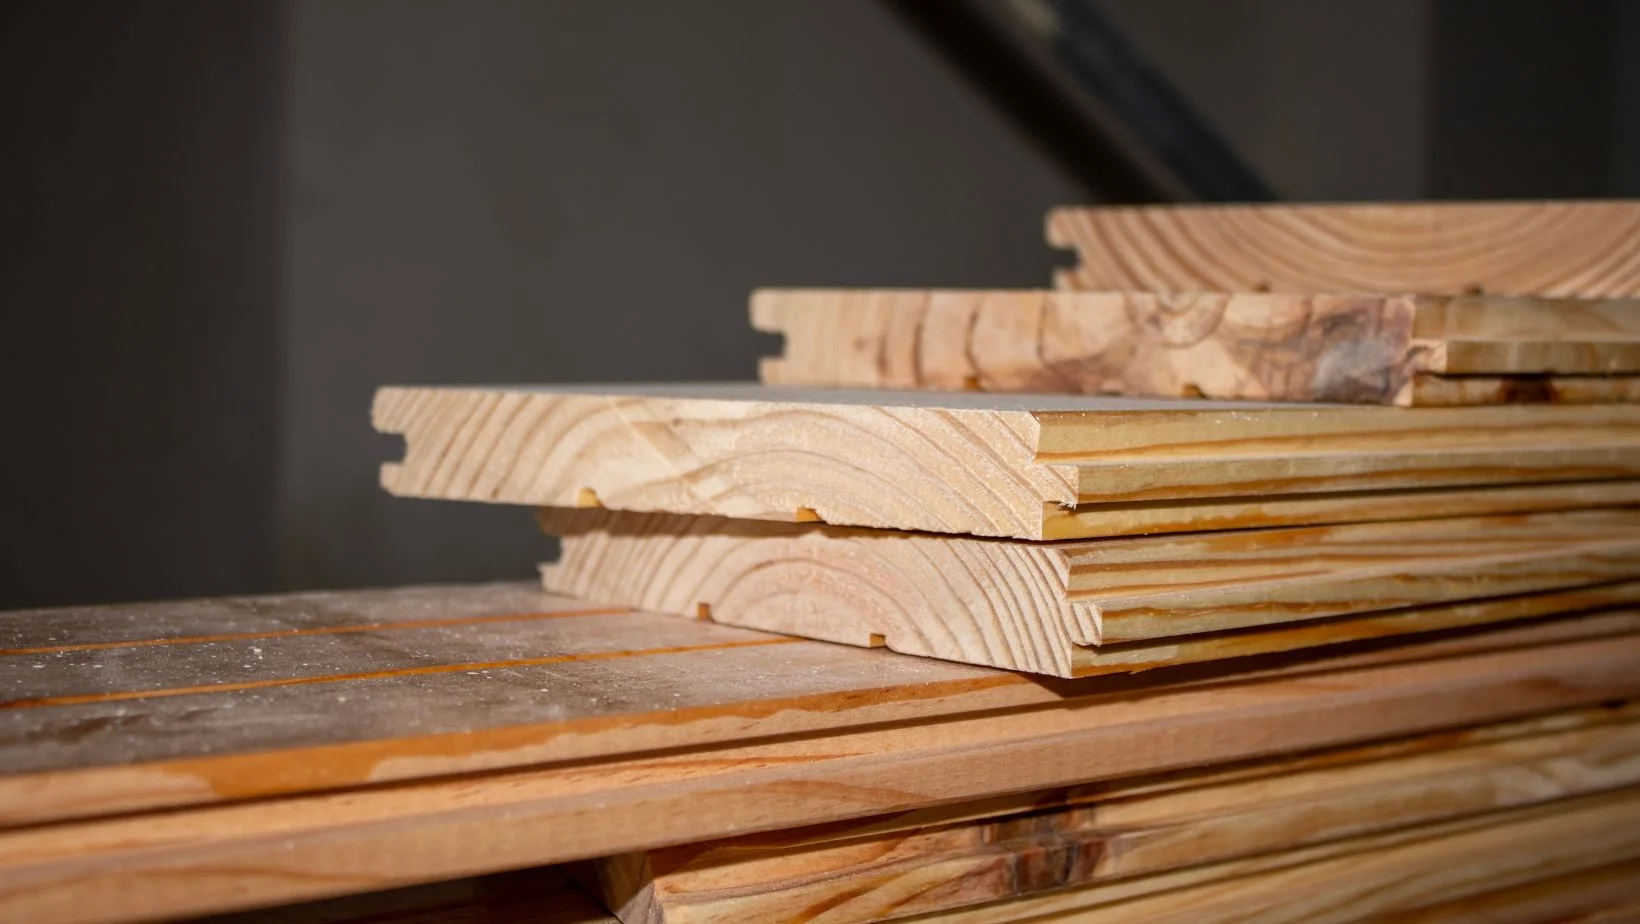 tongue and groove wooden boards